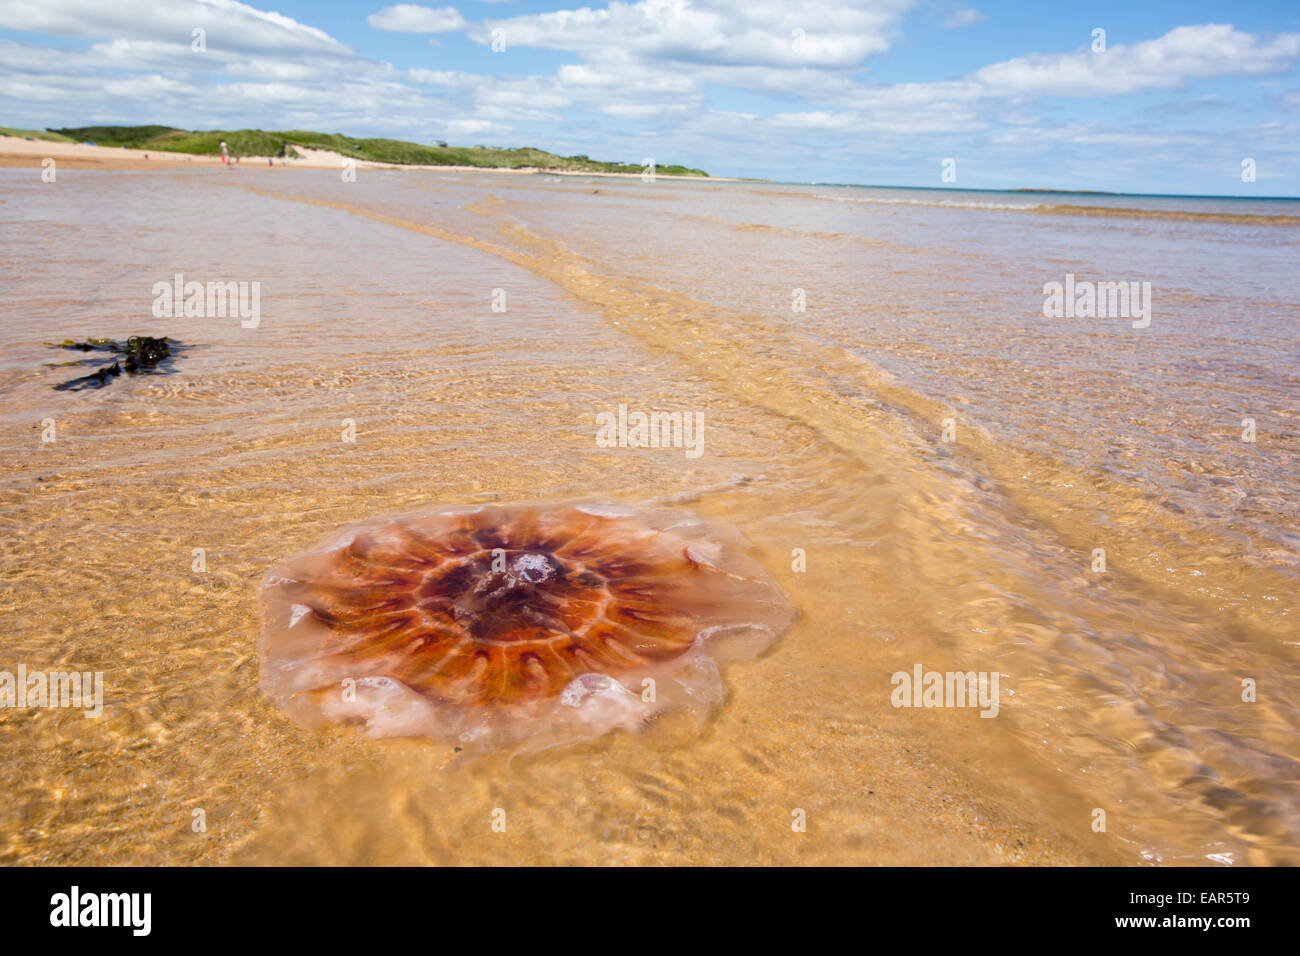 Jellyfish washed up on Beadnell beach in Northumberland, UK. Stock Photo